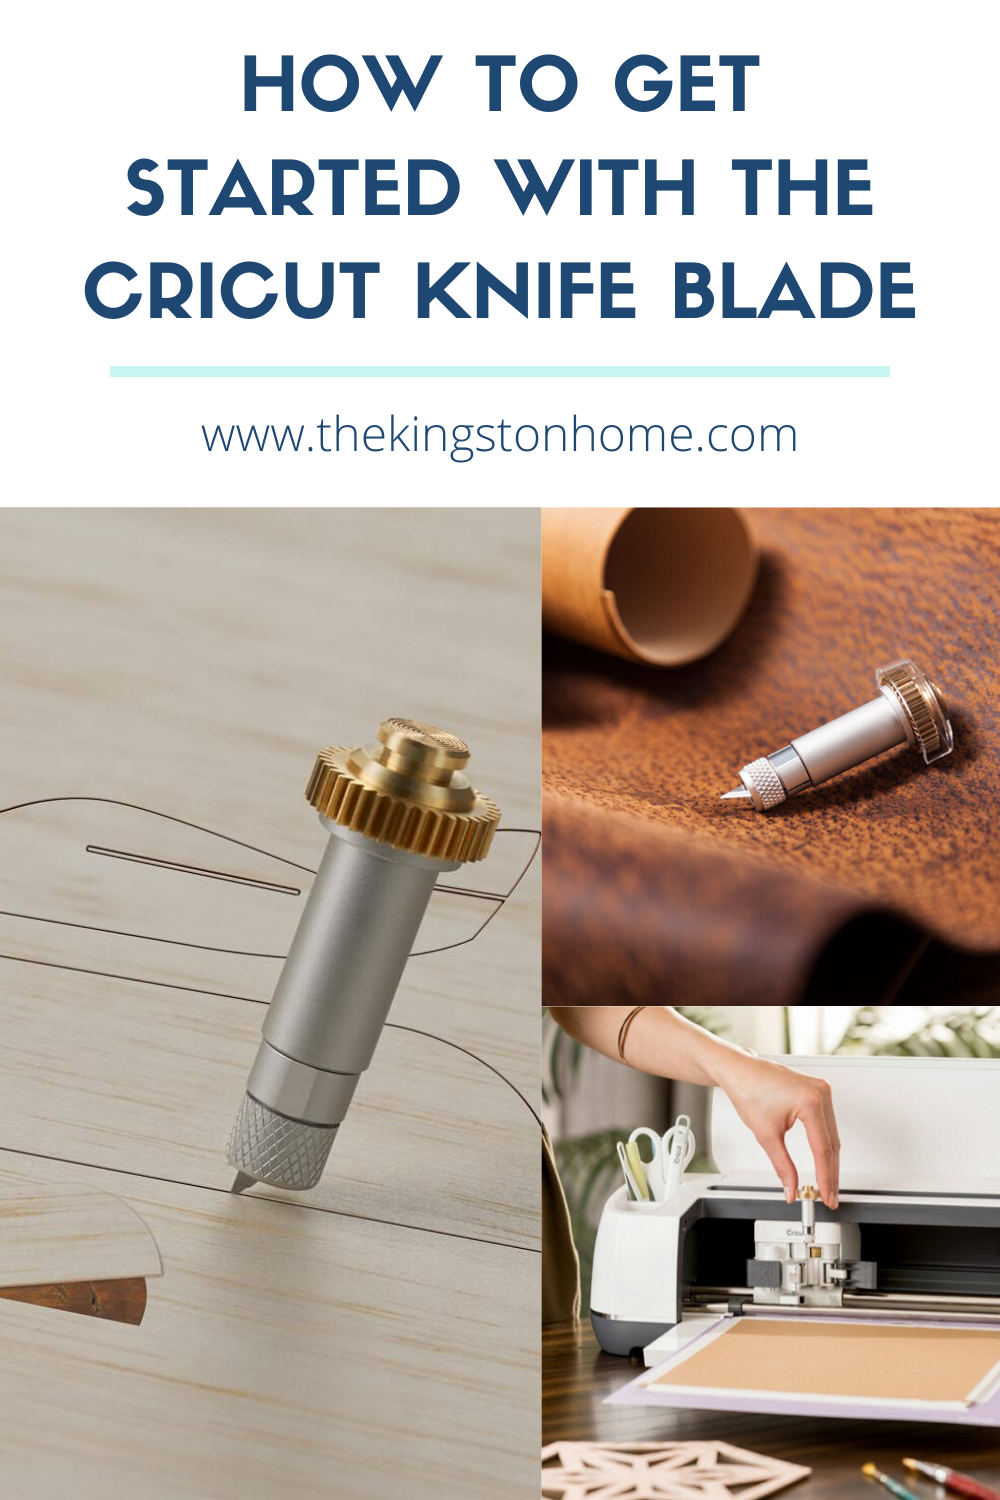 How to Get Started with the Cricut Knife Blade - The Kingston Home: The Cricut Knife Blade is here! Created for the Cricut Maker machine, this powerful tool is going to bring your crafting to a whole new level. In just a few quick steps you'll be ready to cut materials you never could have imagined! via @craftykingstons